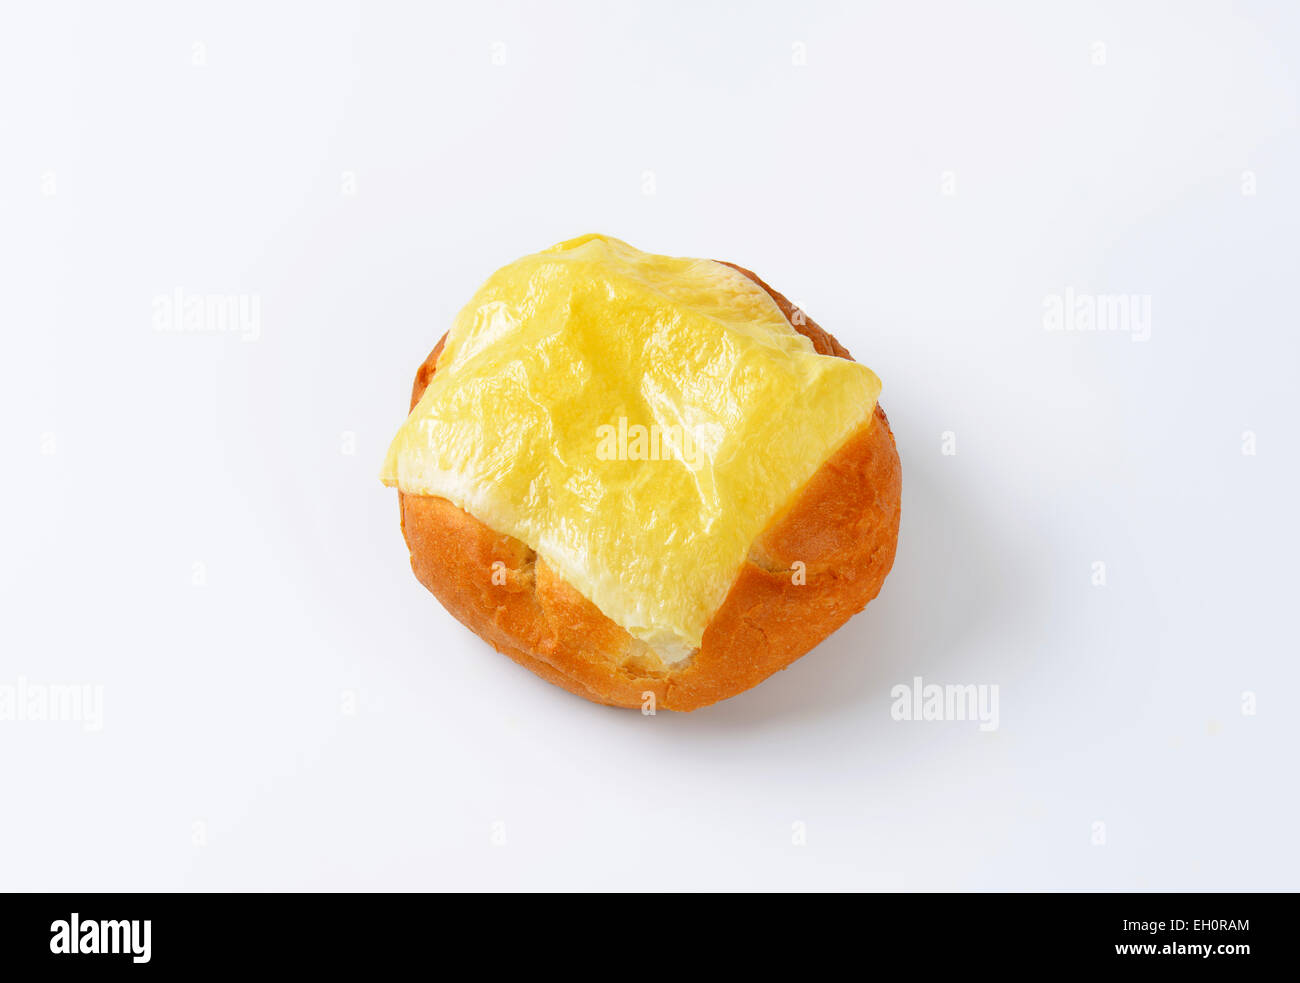 Bread bun with melted cheese on top Stock Photo